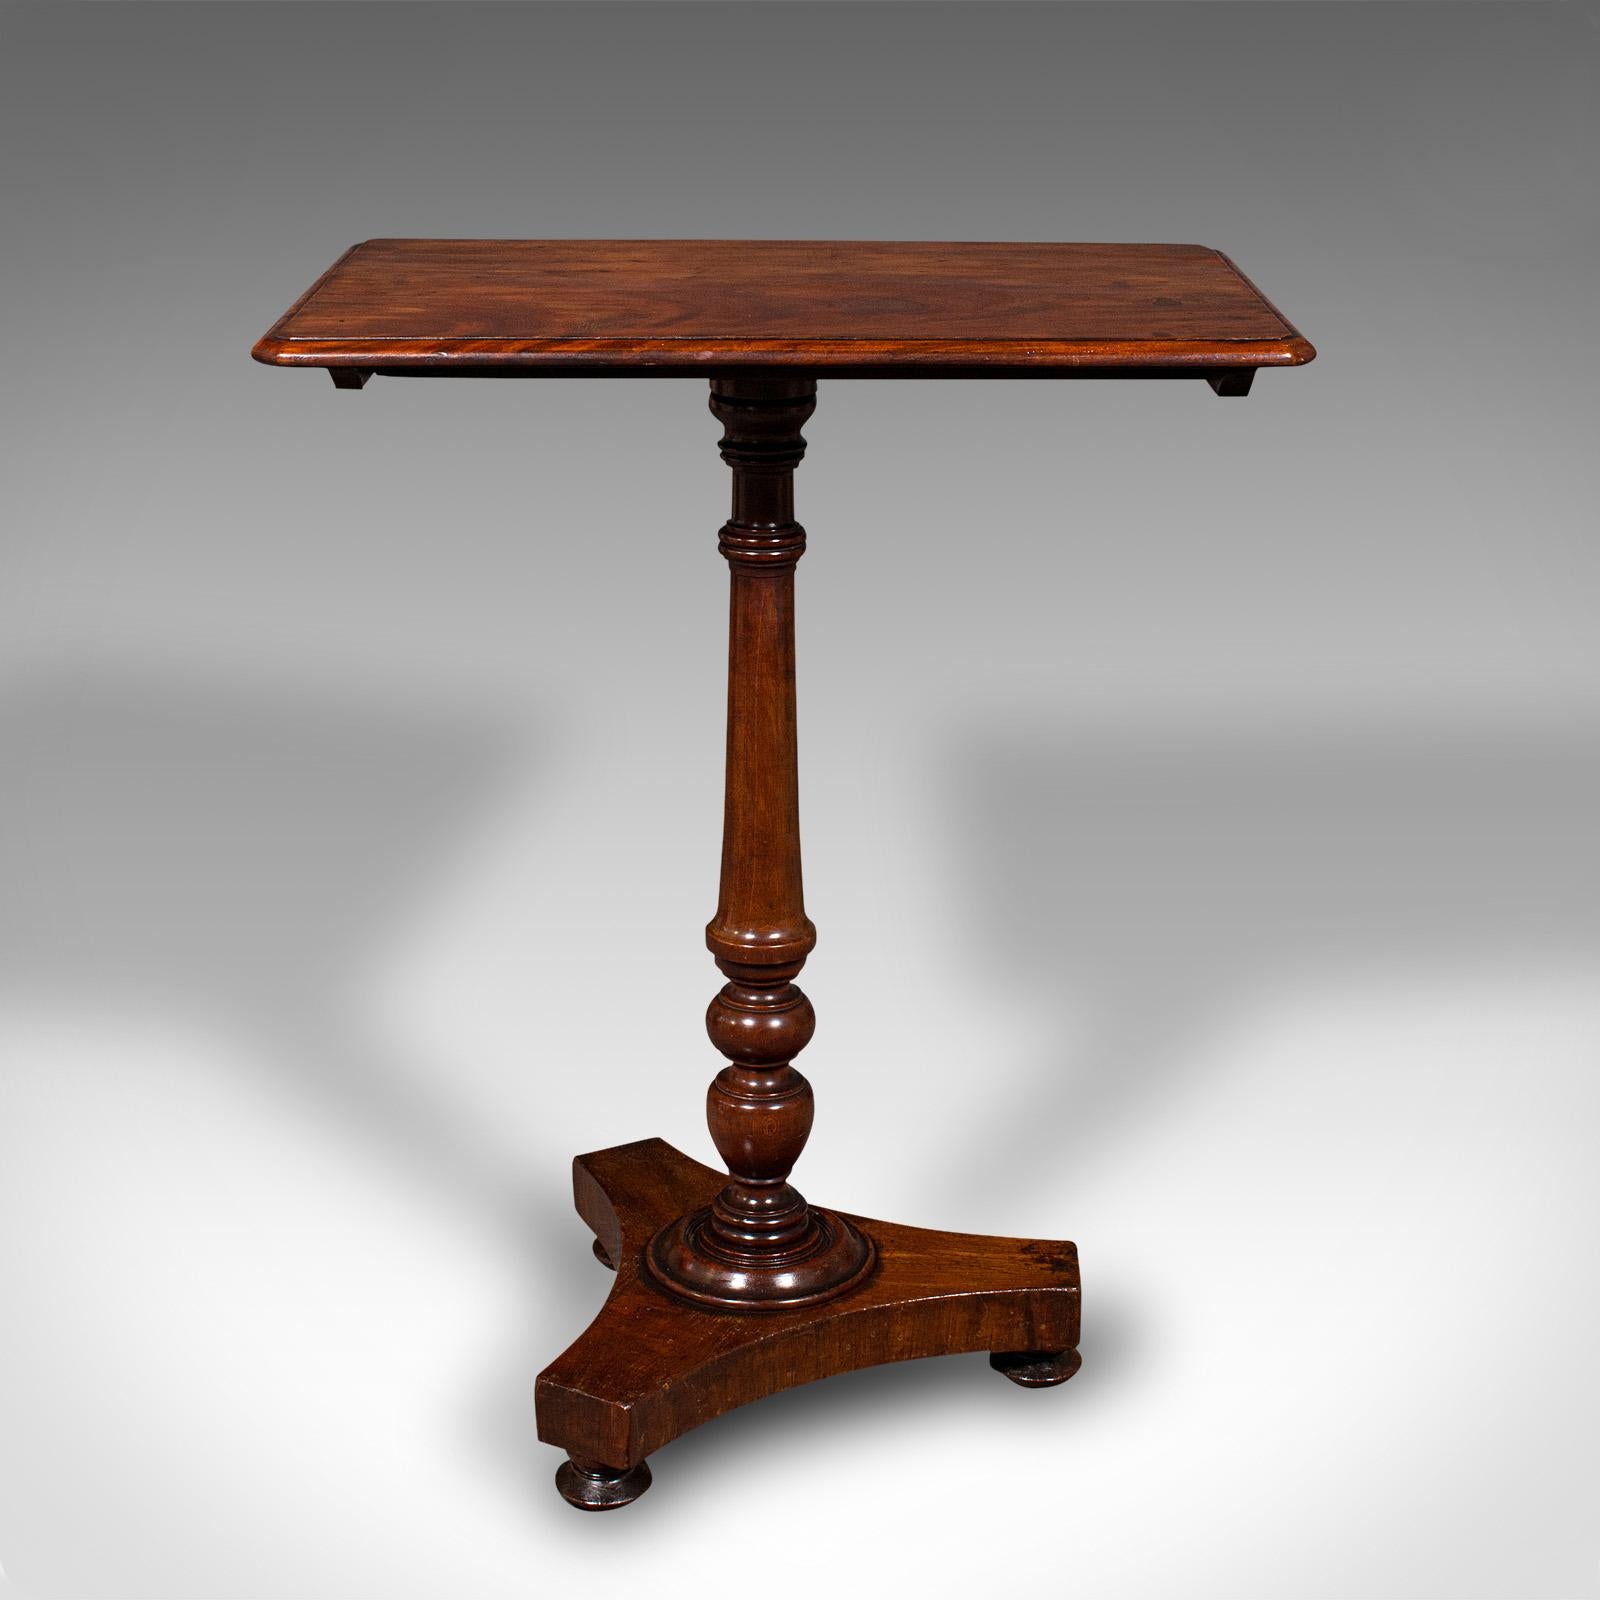 Antique Tilting Lamp Table, English, Flame, Occasional, Side, Regency circa 1820 In Good Condition For Sale In Hele, Devon, GB